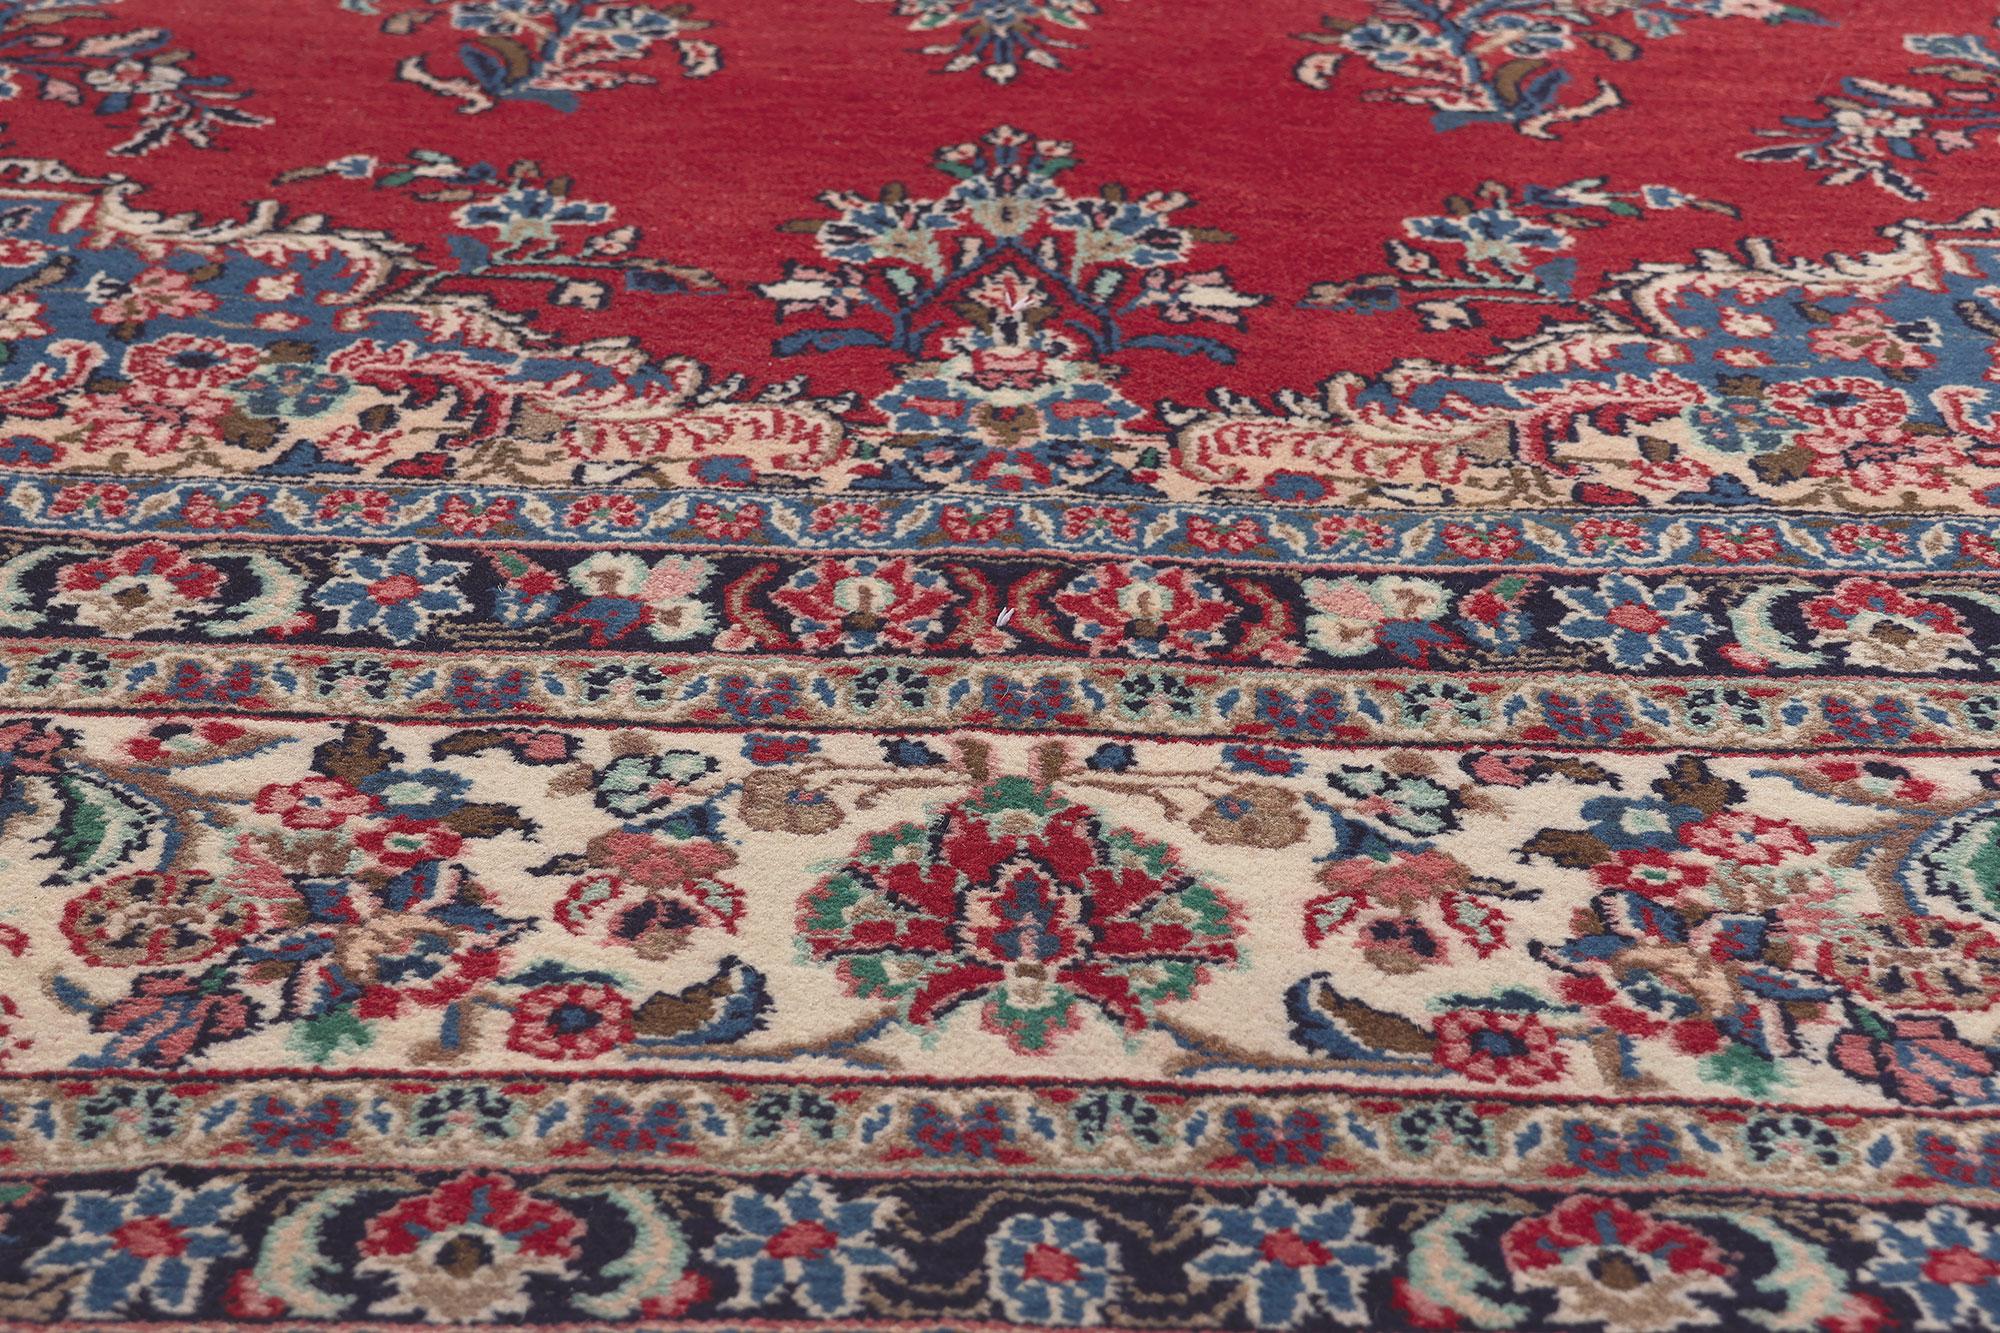 Vintage Persian Hamadan Rug, Stately Decadence Meets Luxurious Jacobean Style In Good Condition For Sale In Dallas, TX